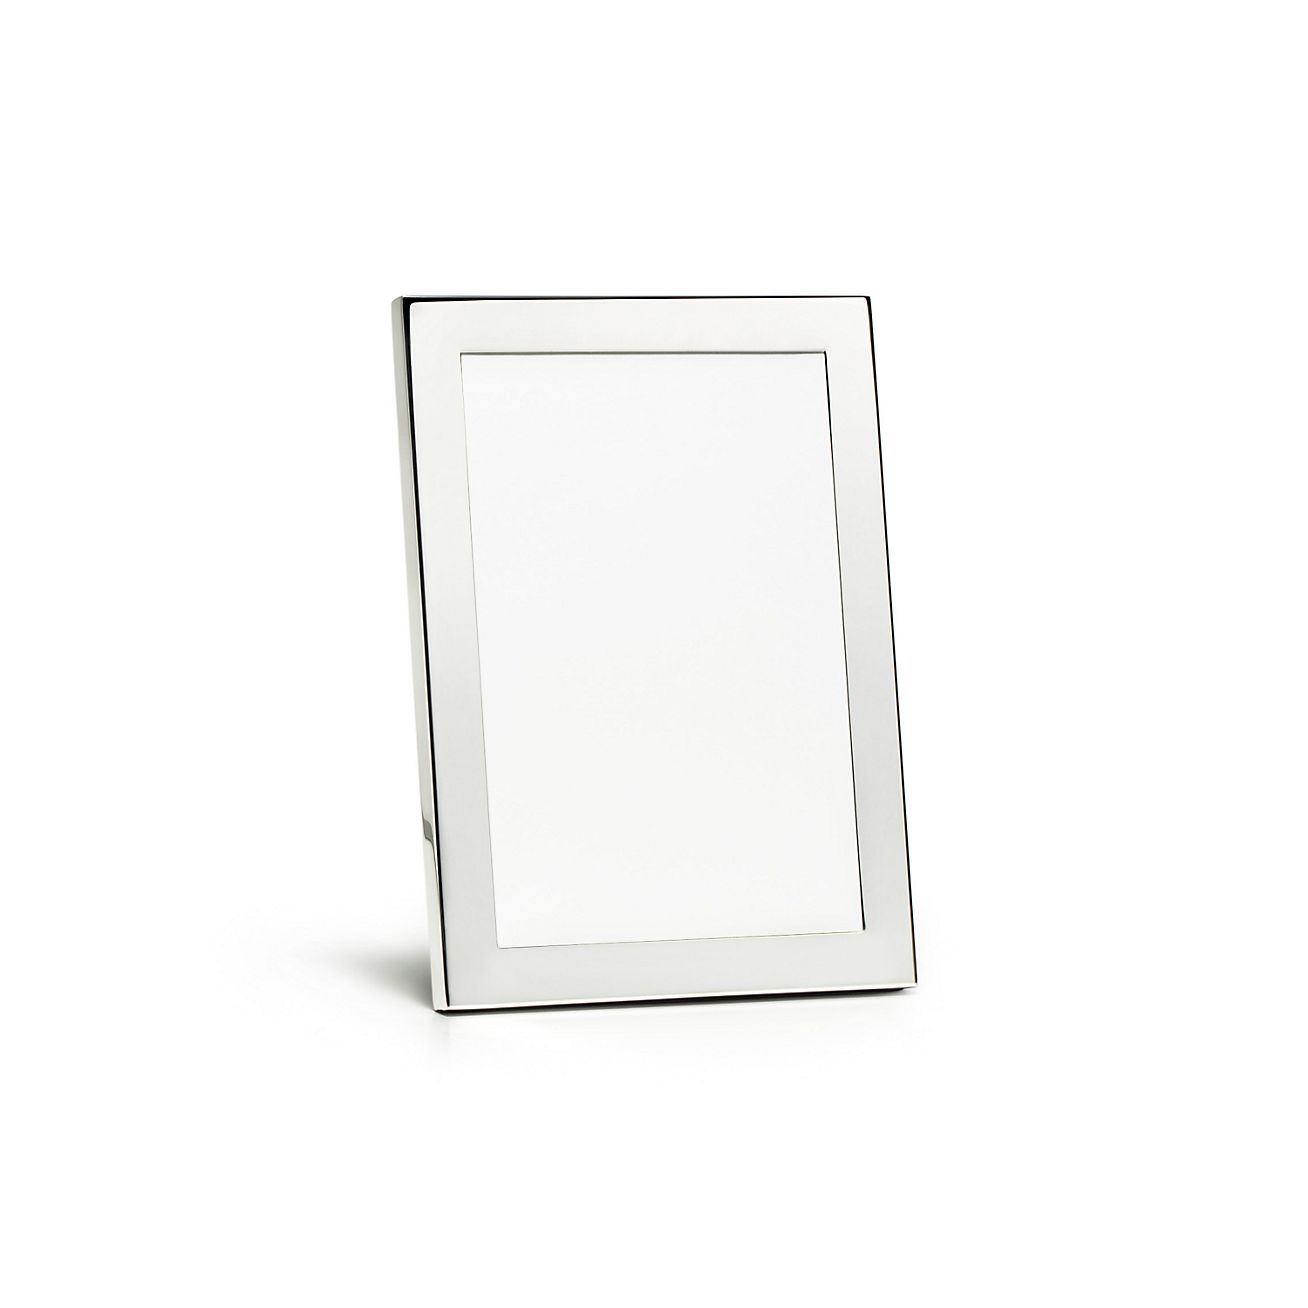 Rectangular frame in sterling silver, size 4 x 6